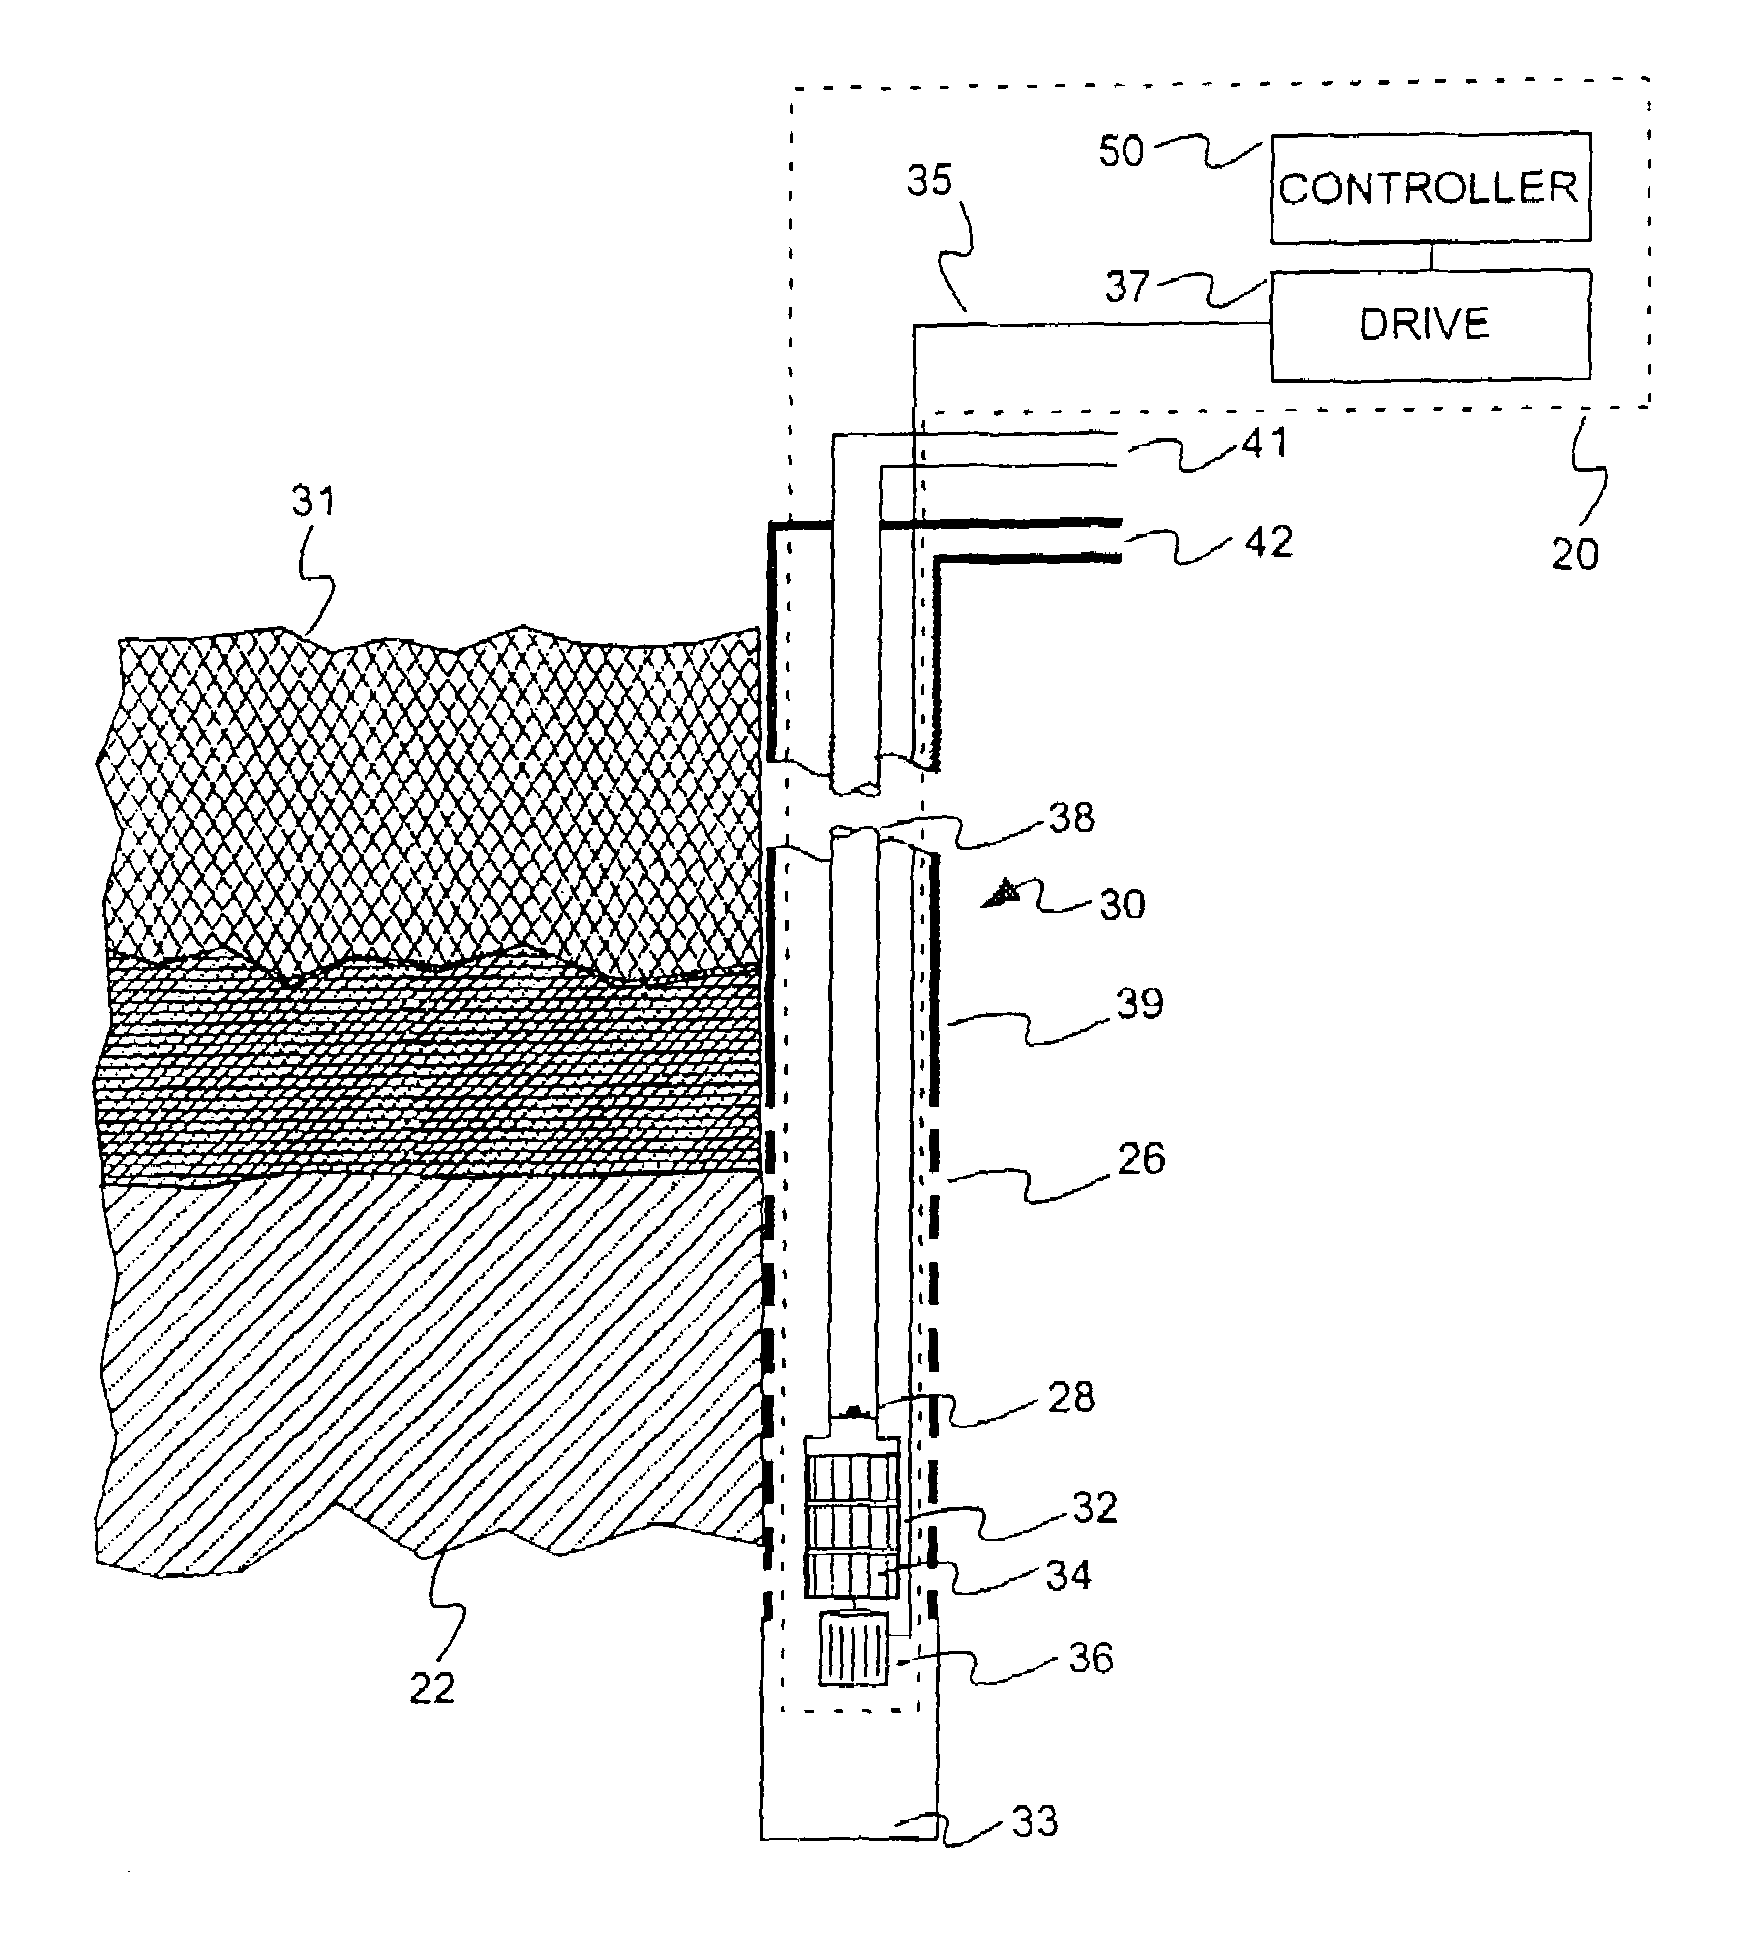 Determination and control of wellbore fluid level, output flow, and desired pump operating speed, using a control system for a centrifugal pump disposed within the wellbore